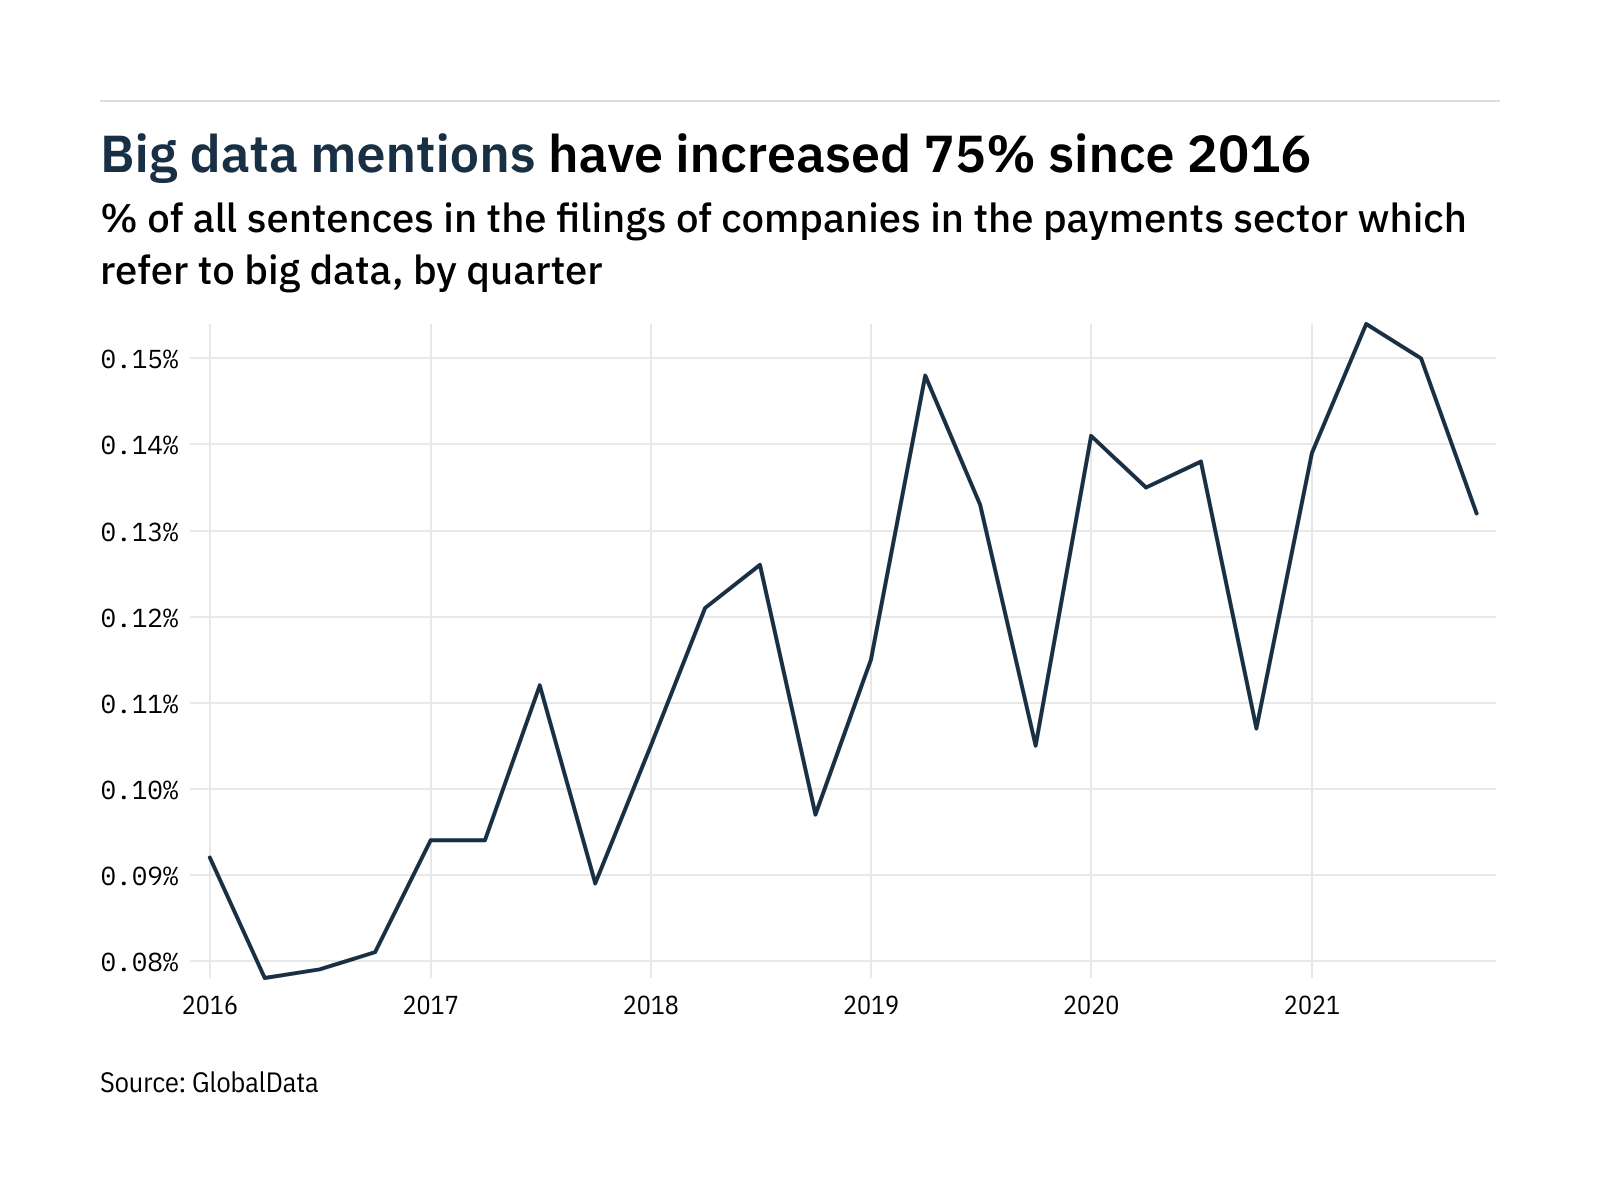 Filings buzz in the payments sector: 12% decrease in big data mentions in Q4 of 2021